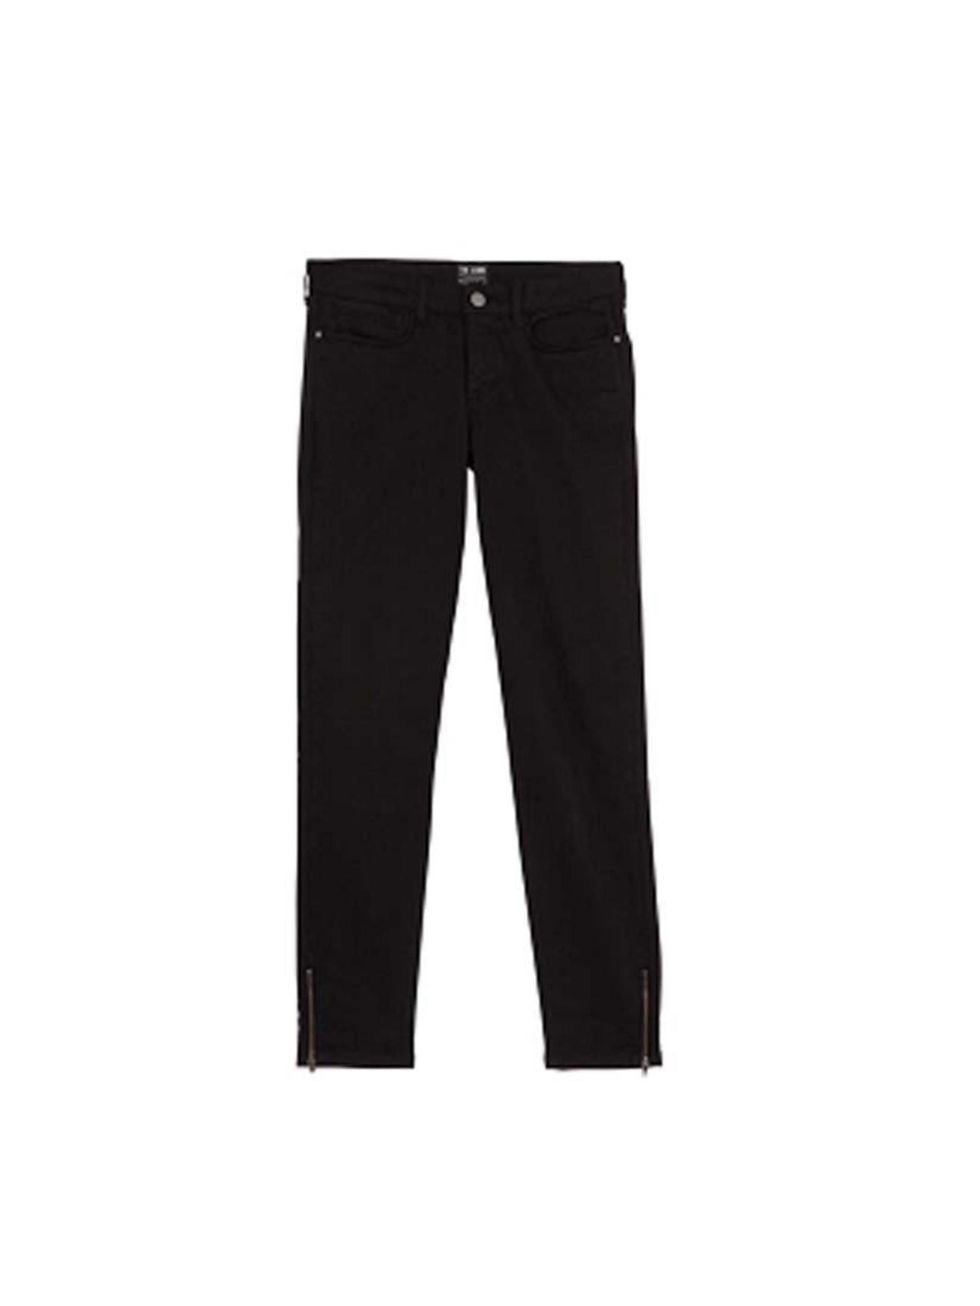 <p>Black skinny jeans are always a good staple for the season</p><p><a href="http://www.comptoirdescotonniers.co.uk/eboutique/womens-collection/jeans-and-trousers/5979-9rofira-color-black-9rofira.html">Comptoir des Cotonniers</a>, £100</p>